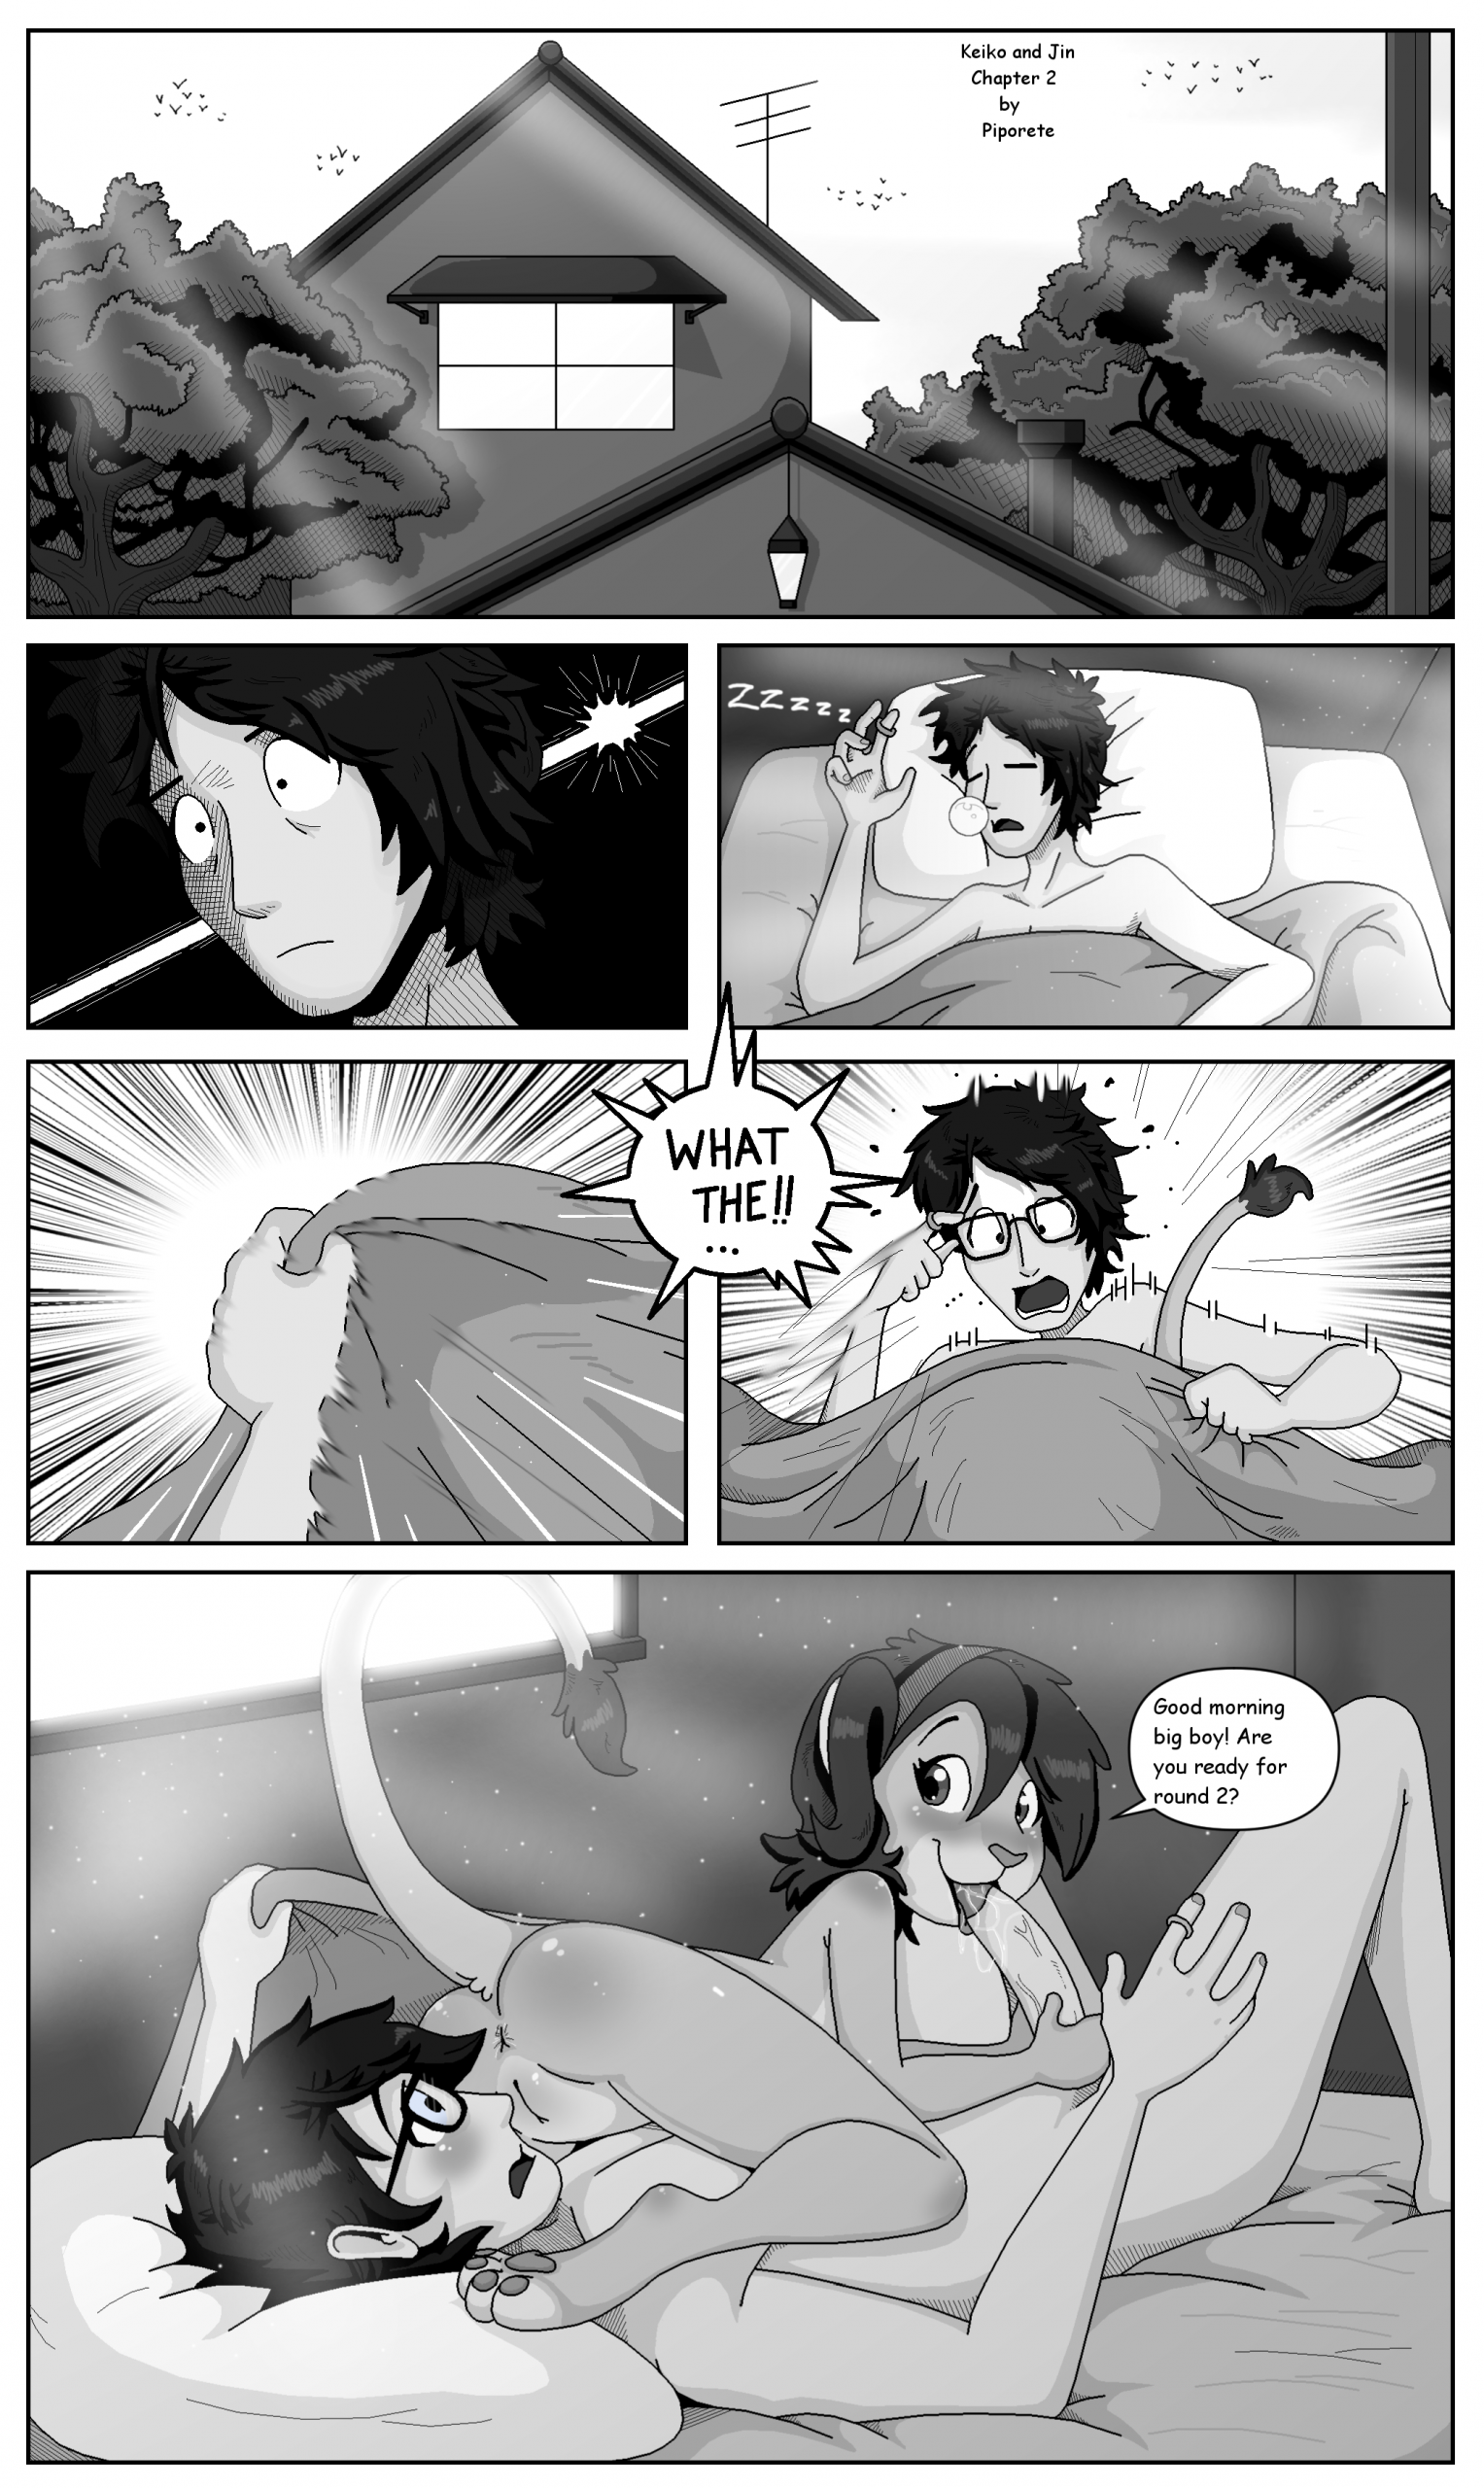 Keiko and Jin - Chapter 1 - 3 porn comic picture 16